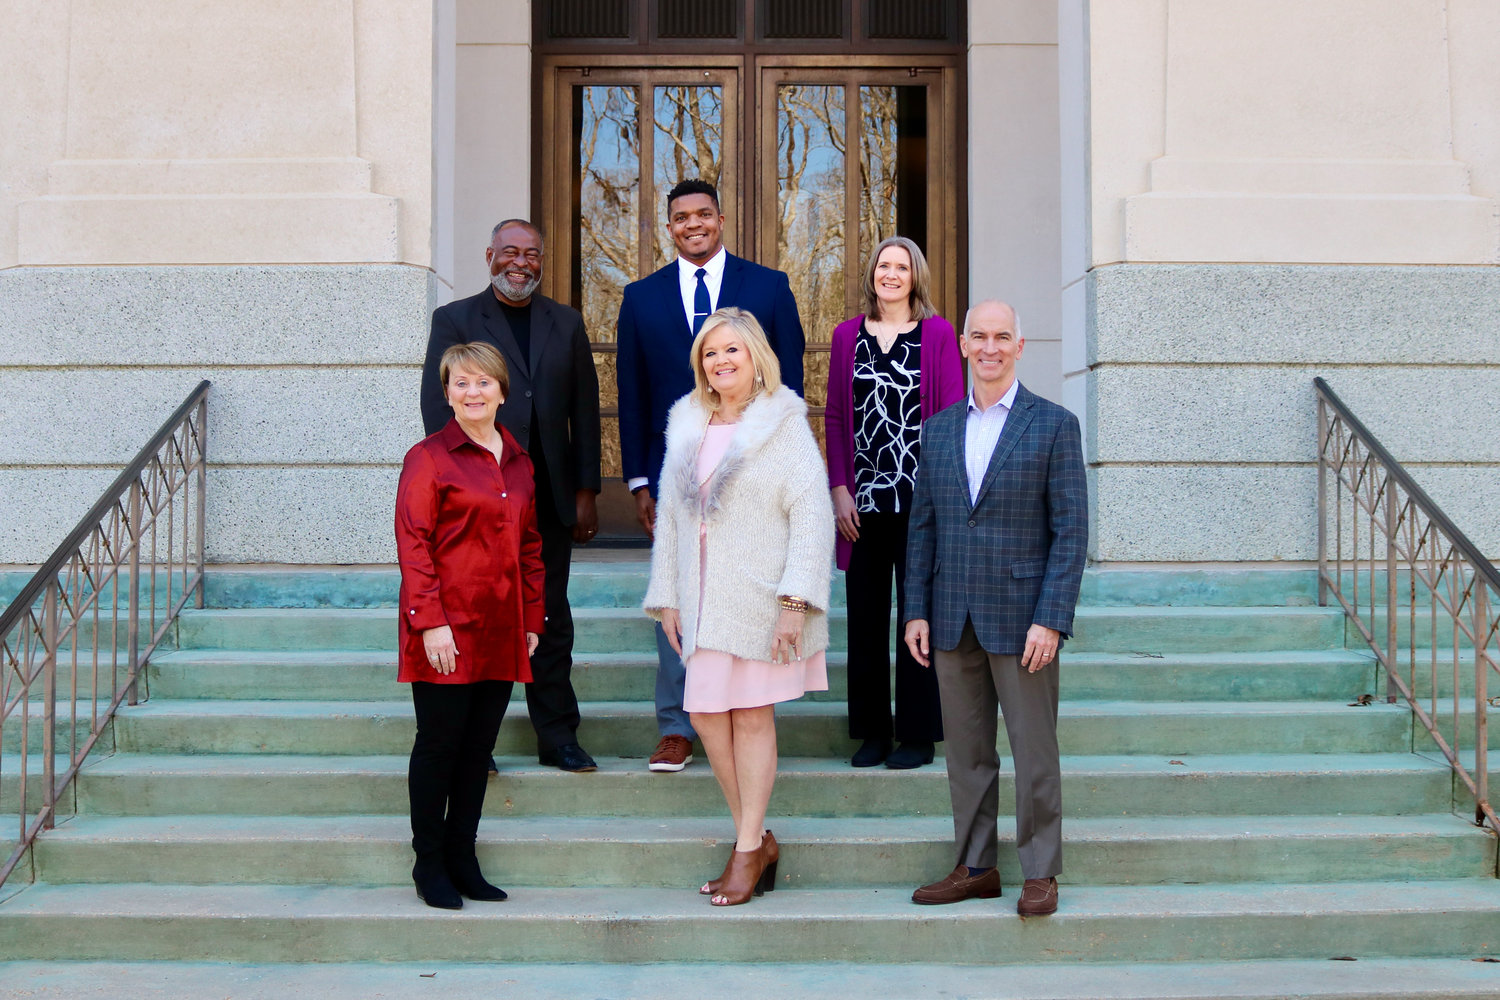 Pictured are the founding board members of the Madison County Schools Education Foundation (from left, front) Janie Jarvis; Gaye Broyles, president; Tommy McMillan, secretary/treasurer. (Back) Tim Pickett; Chamar McDonald; and Sissy Lynn, vice president. Not pictured is Camille Young.